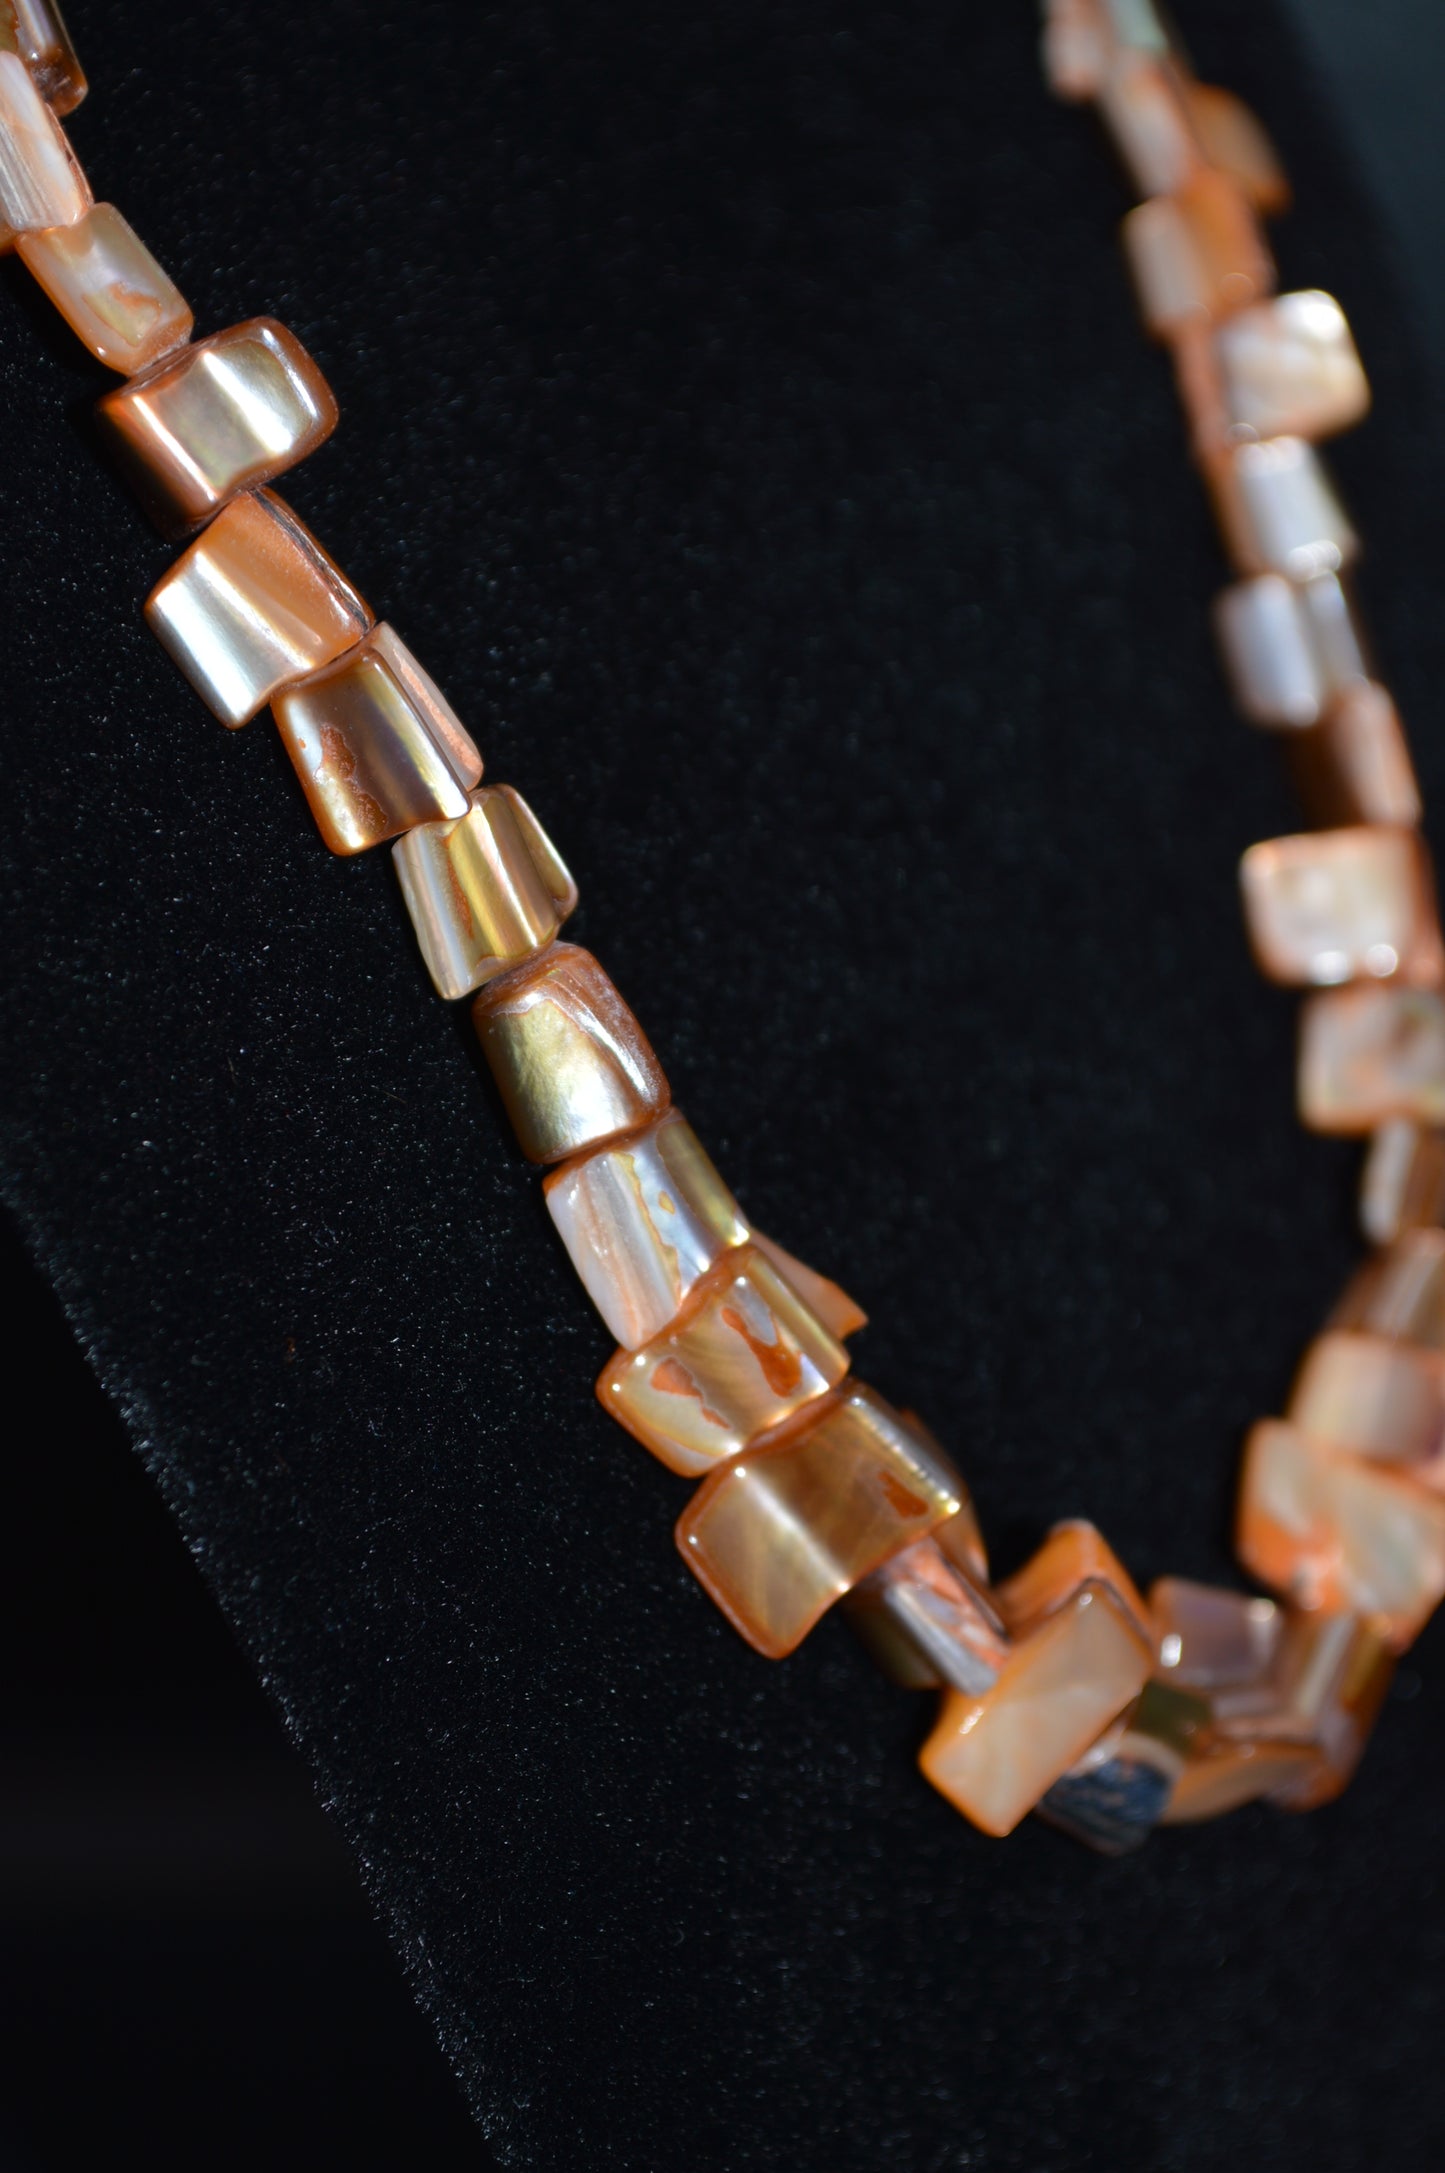 Orange Mother of Pearl Nuggets Necklace and Earring Set